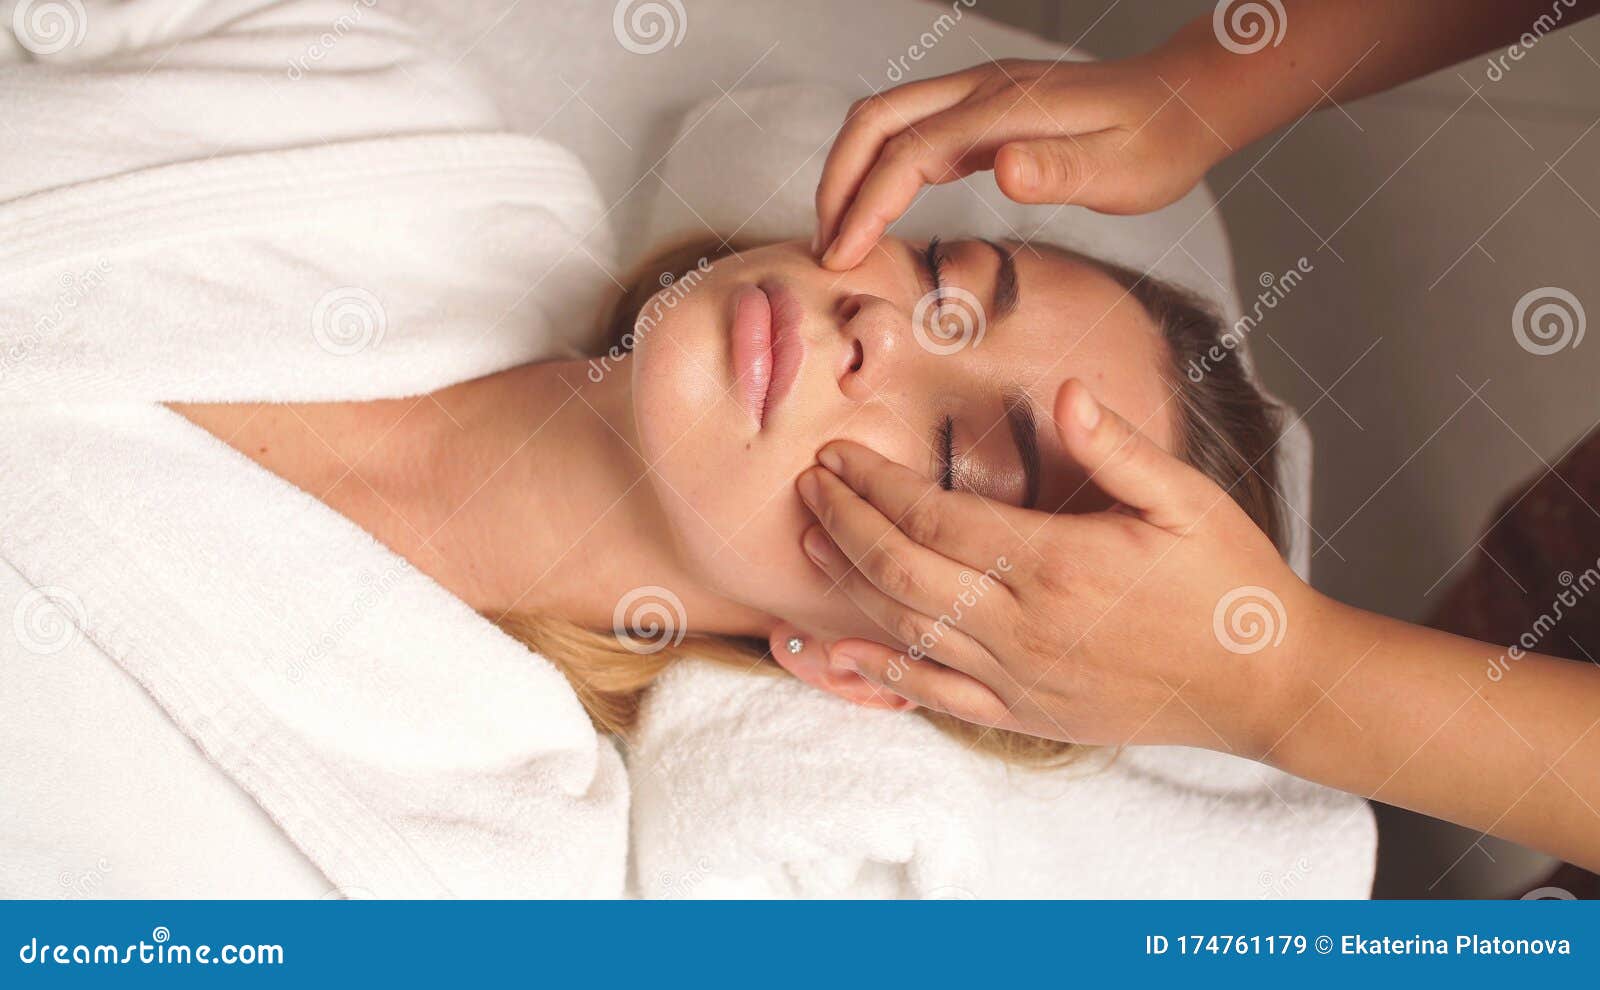 Anti Aging Facial Massage A Pretty Woman In Complete Relaxation From A